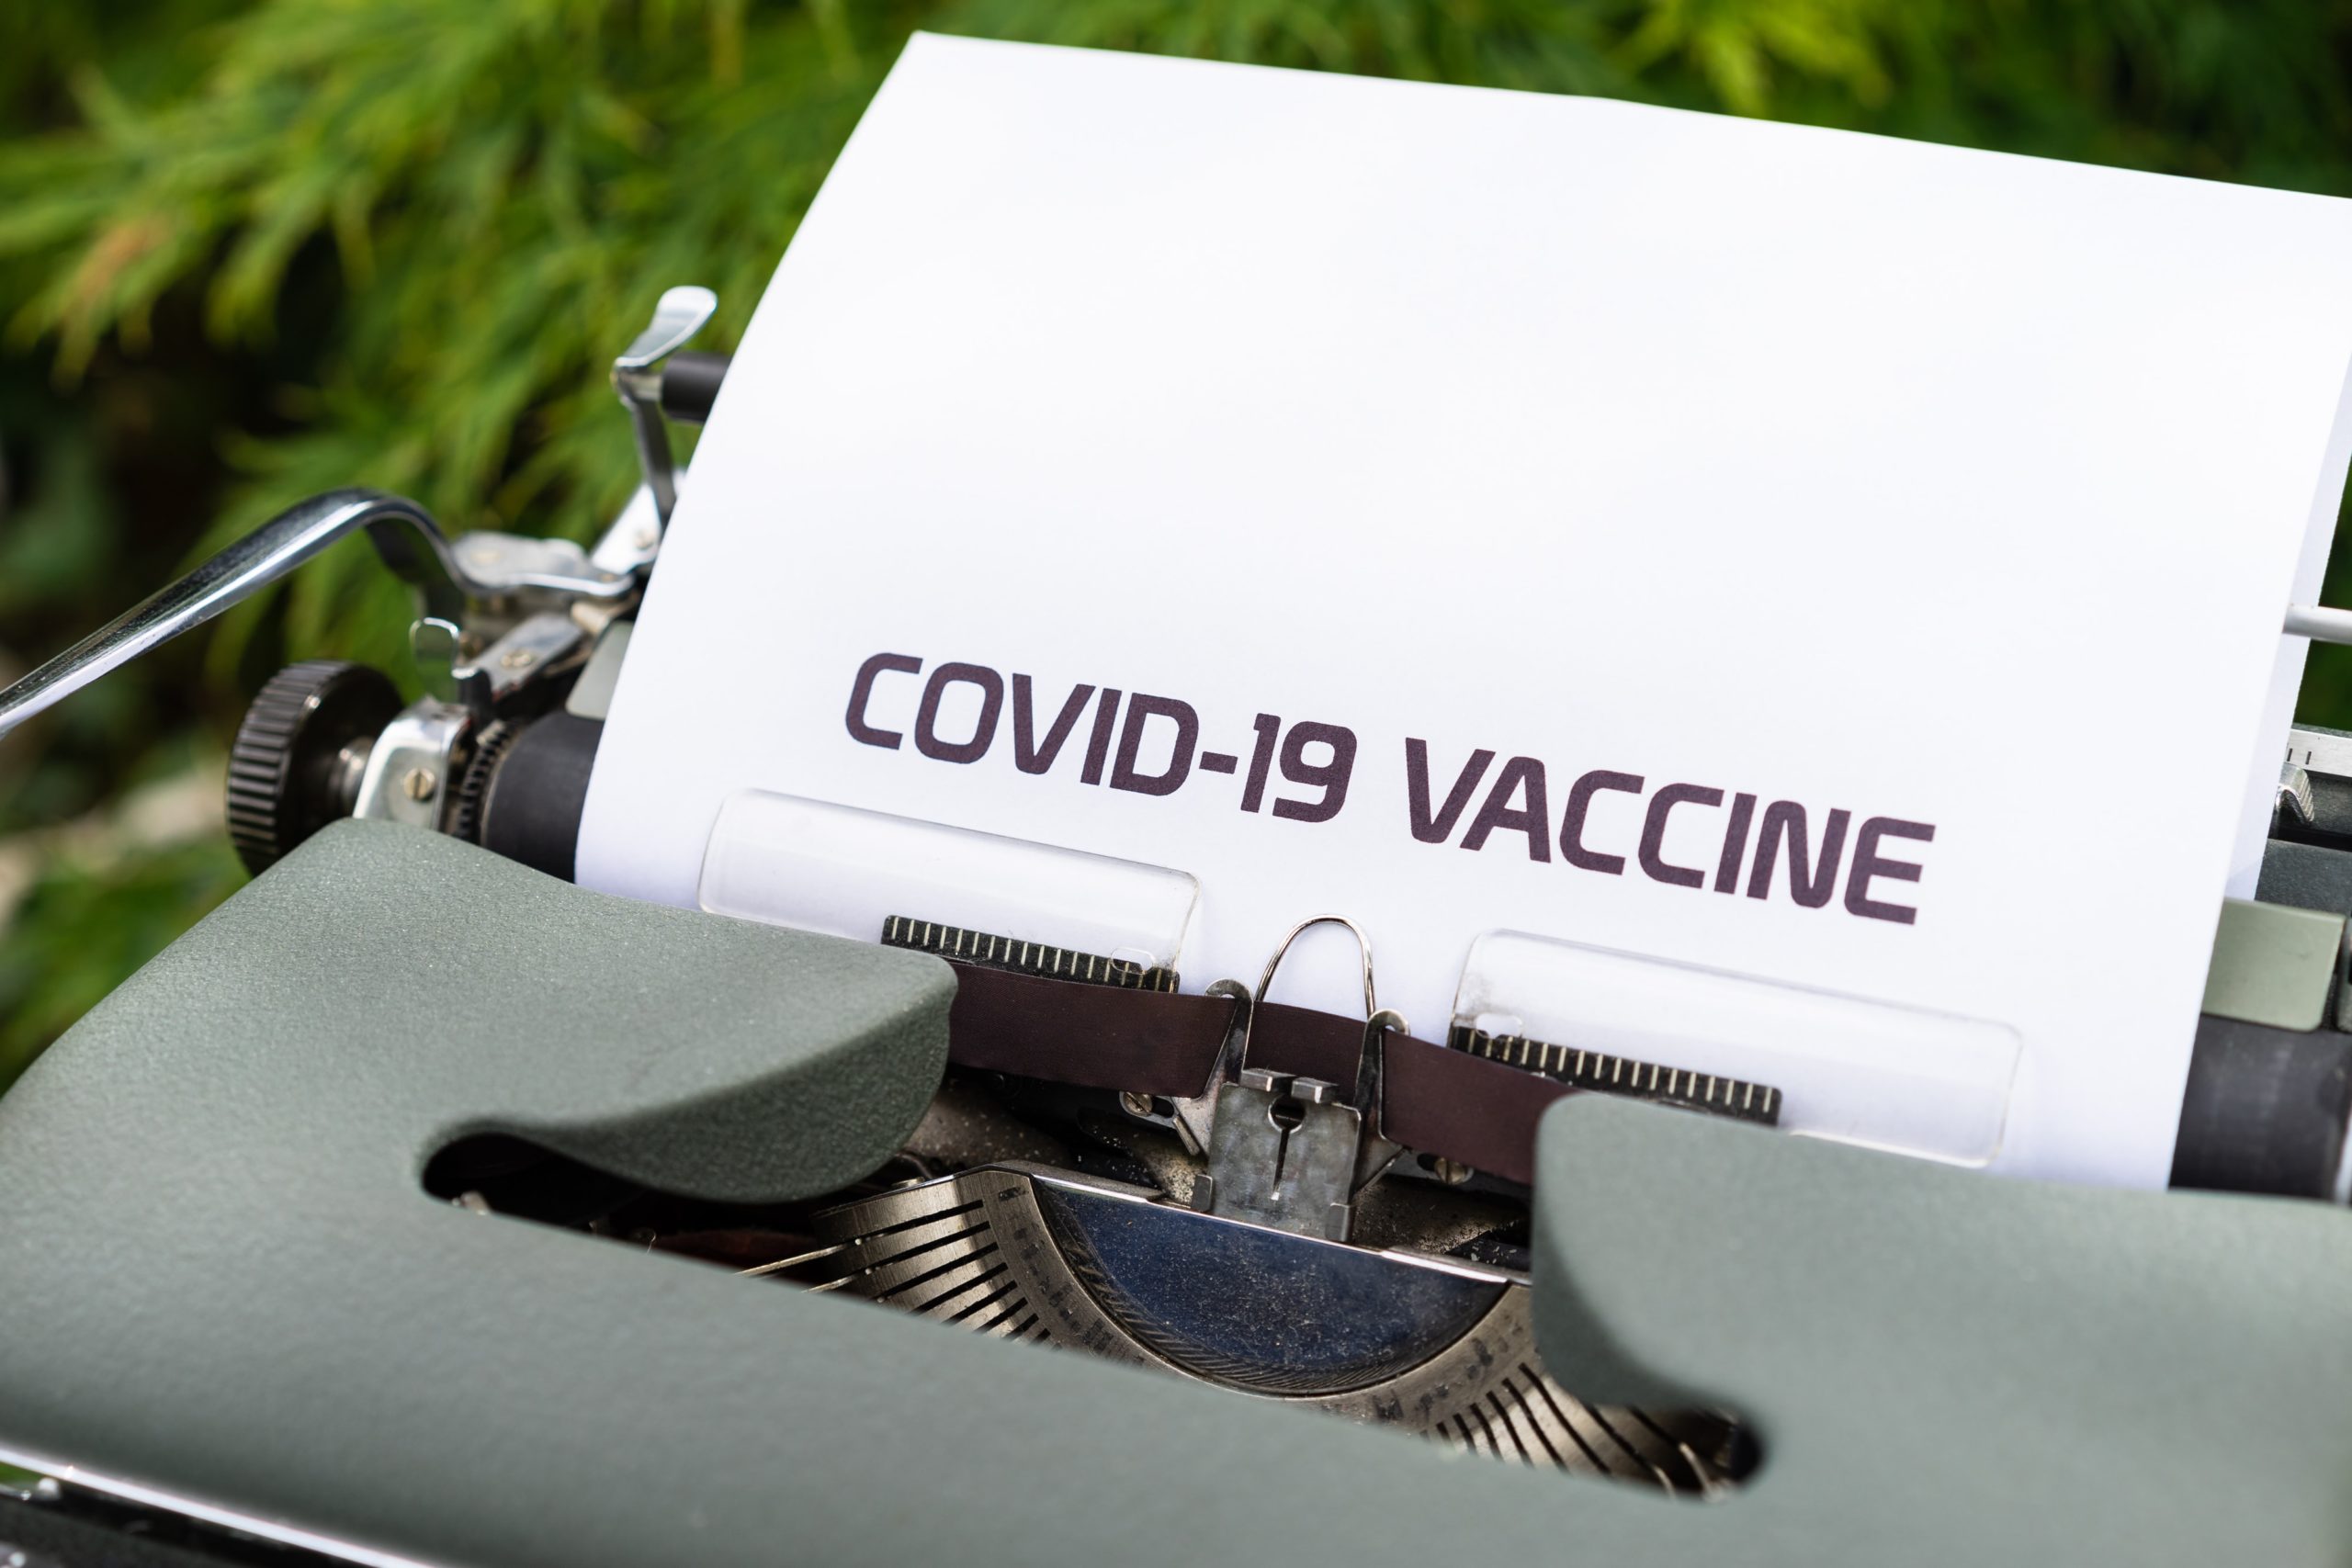 The development process and deployment of the COVID-19 vaccine.